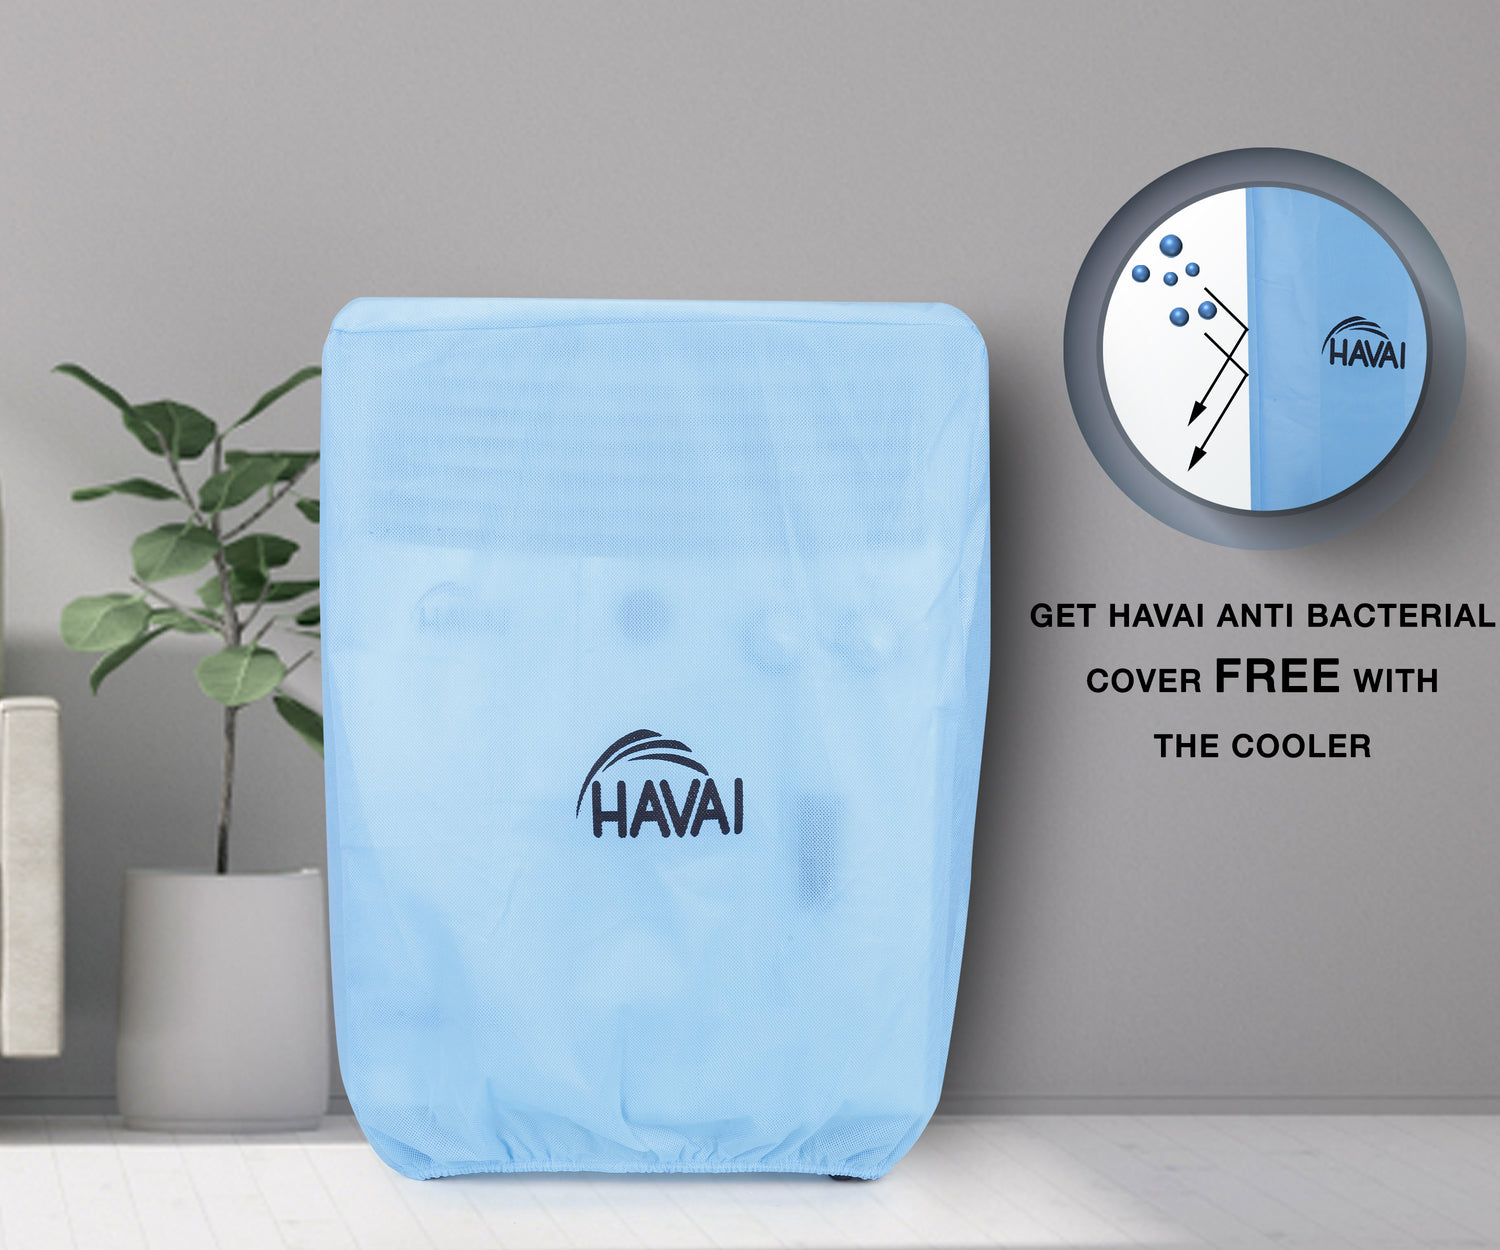 HAVAI Simba XL Personal Cooler with Blower - 20L, White